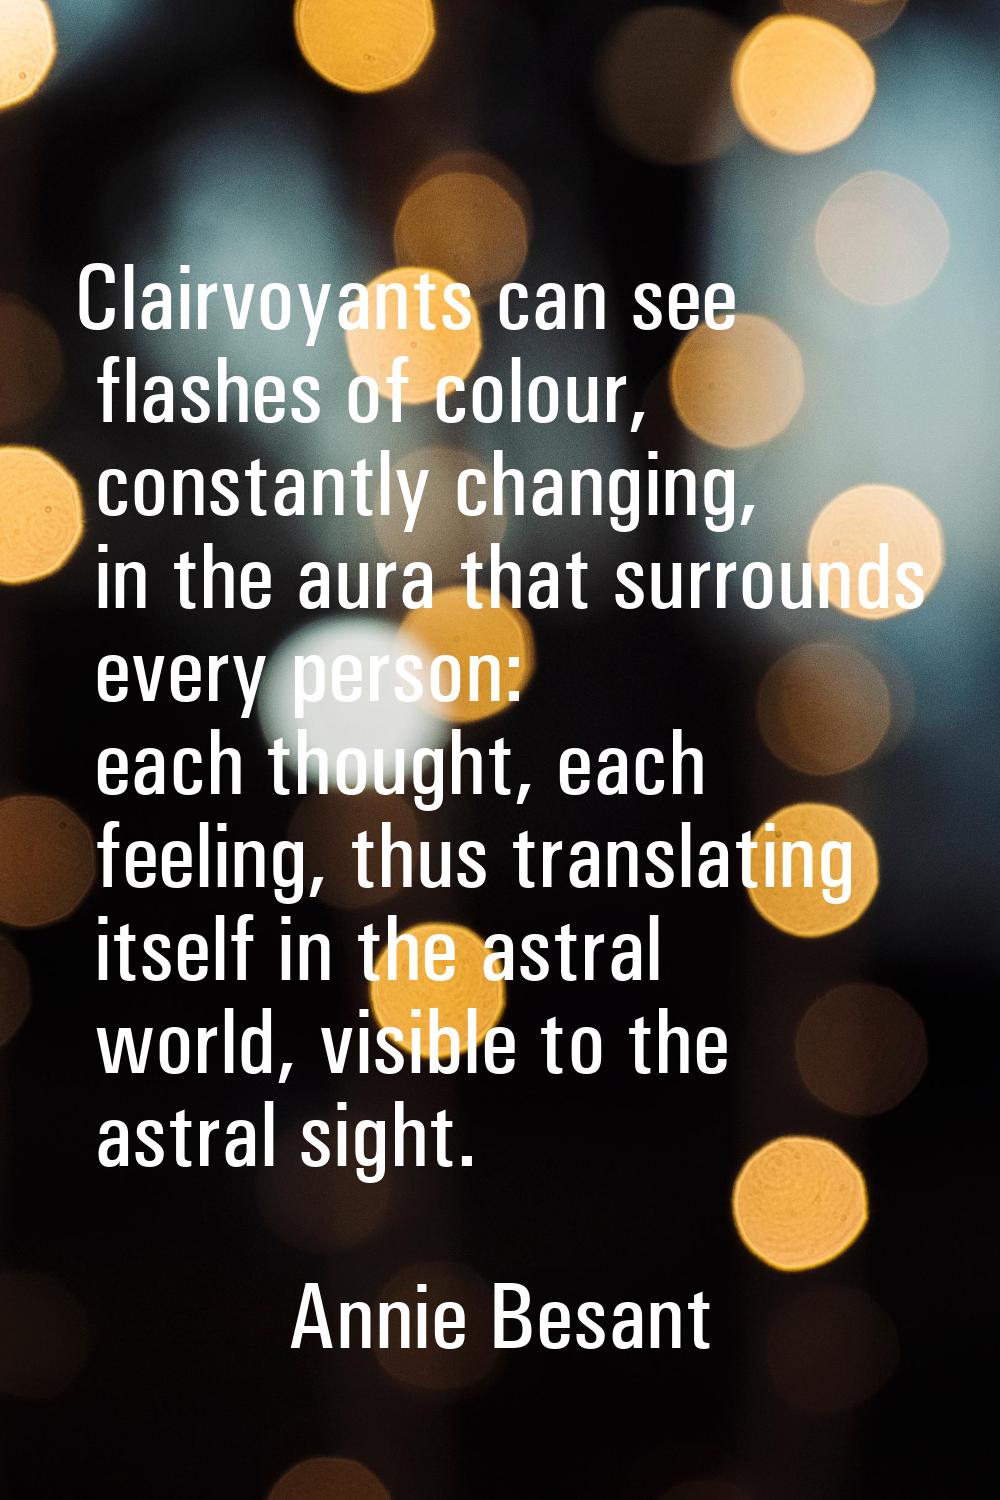 Clairvoyants can see flashes of colour, constantly changing, in the aura that surrounds every perso